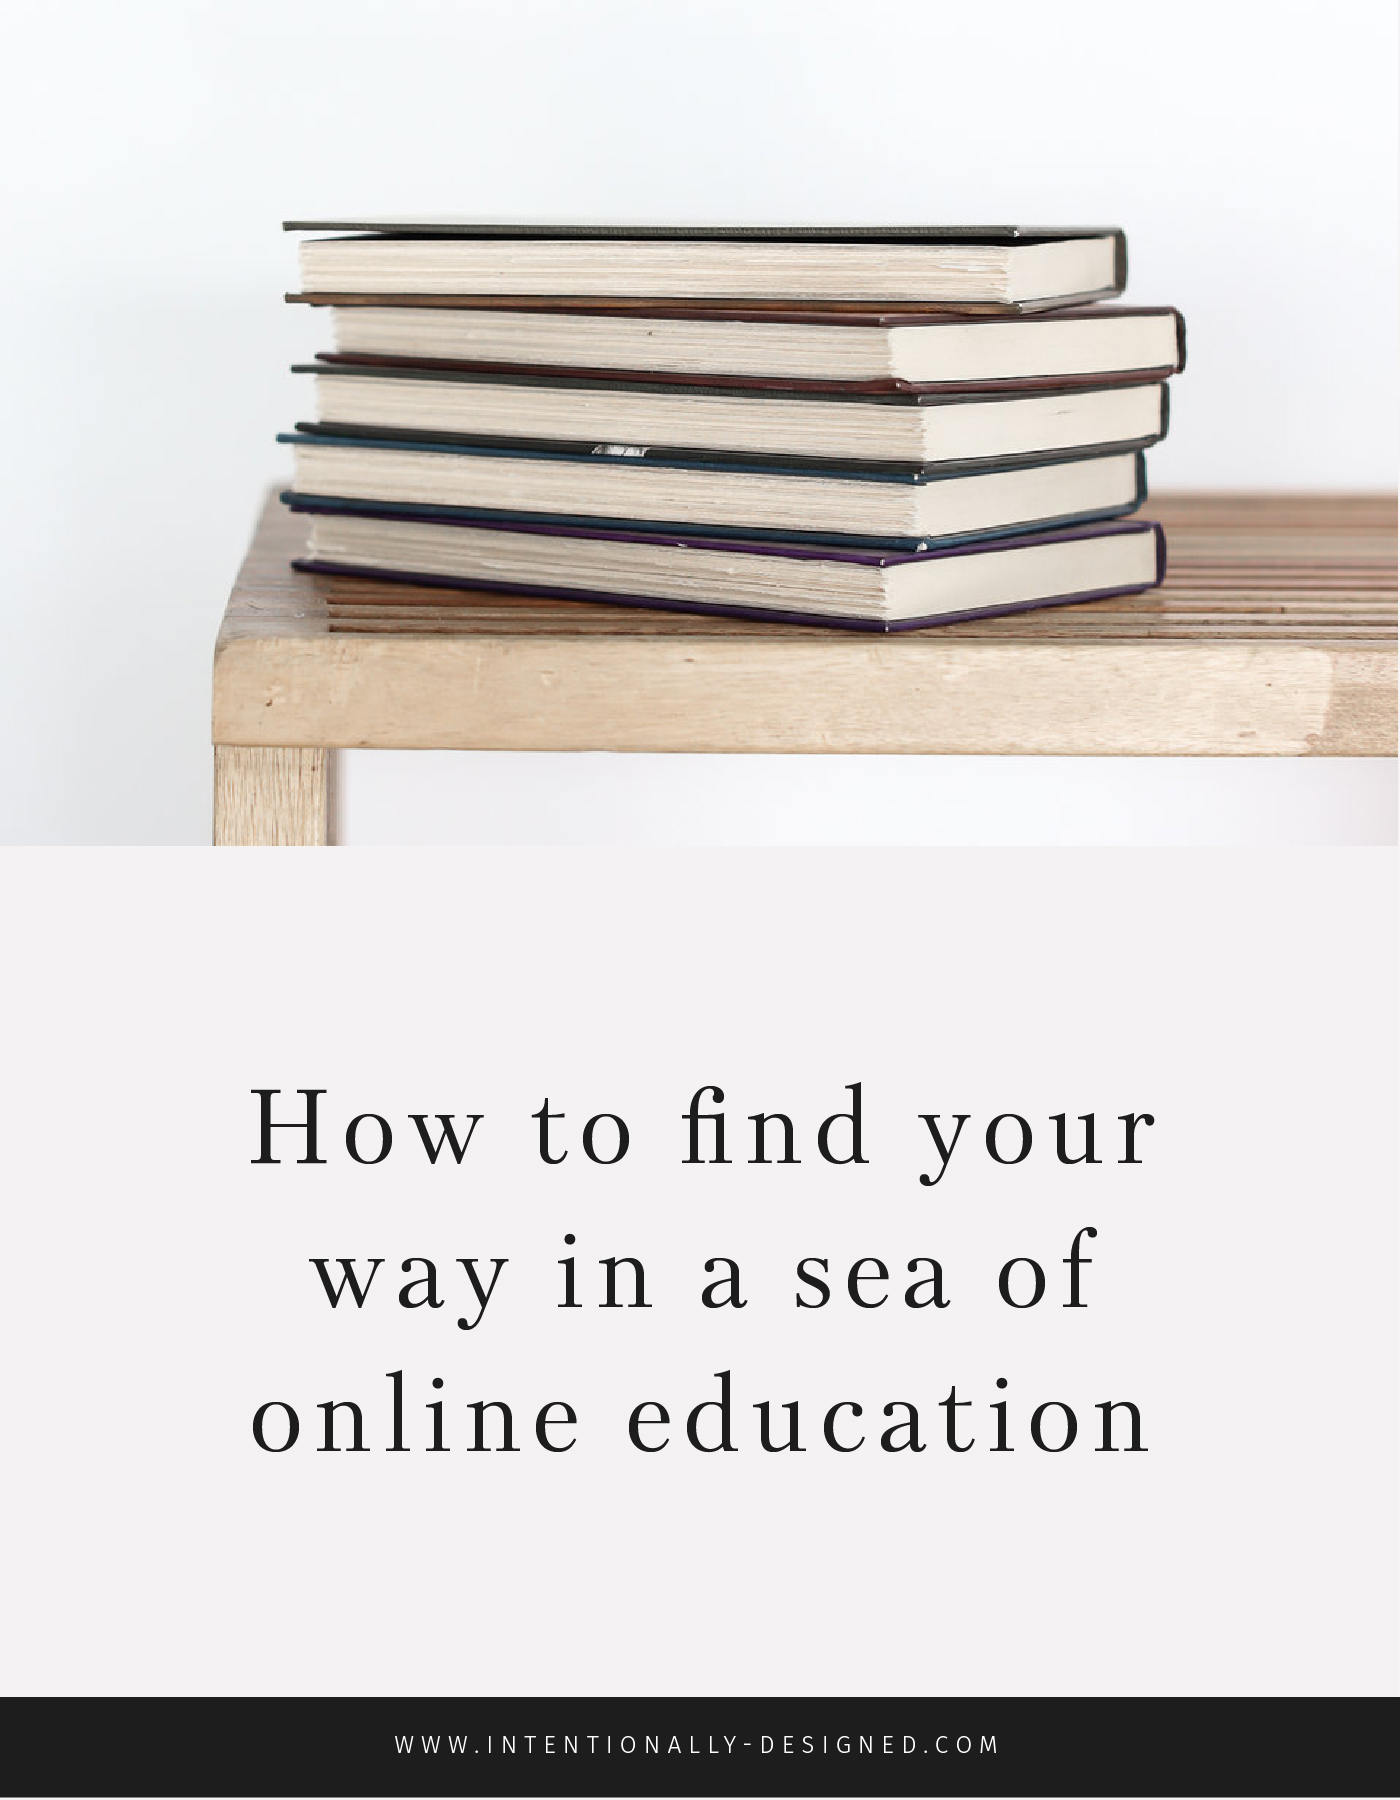 How to find your way in a sea of online education